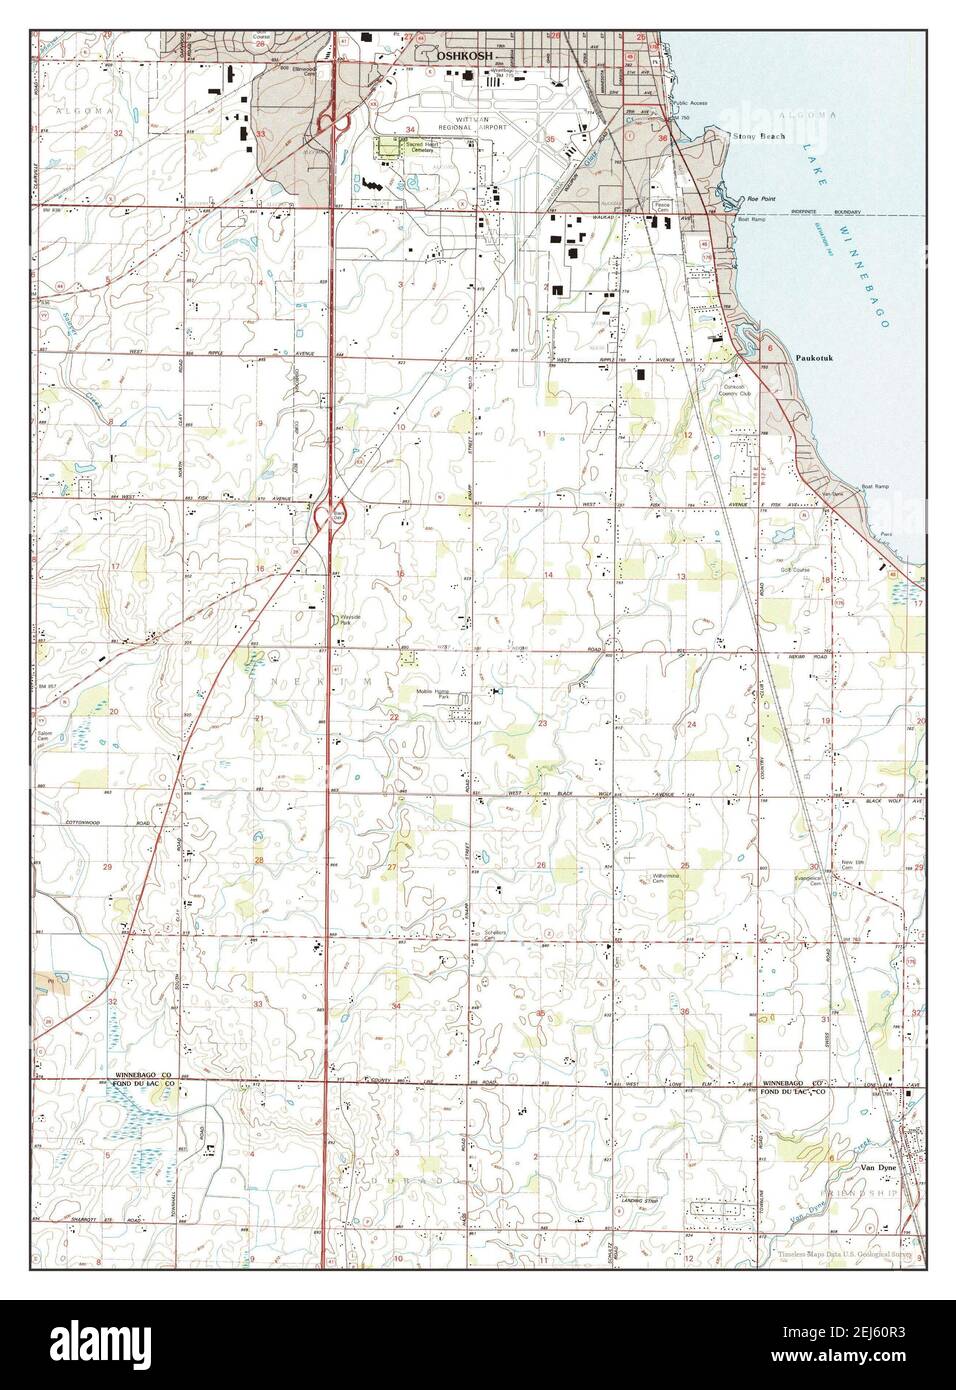 Van Dyne, Wisconsin, map 1992, 1:24000, United States of America by  Timeless Maps, data U.S. Geological Survey Stock Photo - Alamy